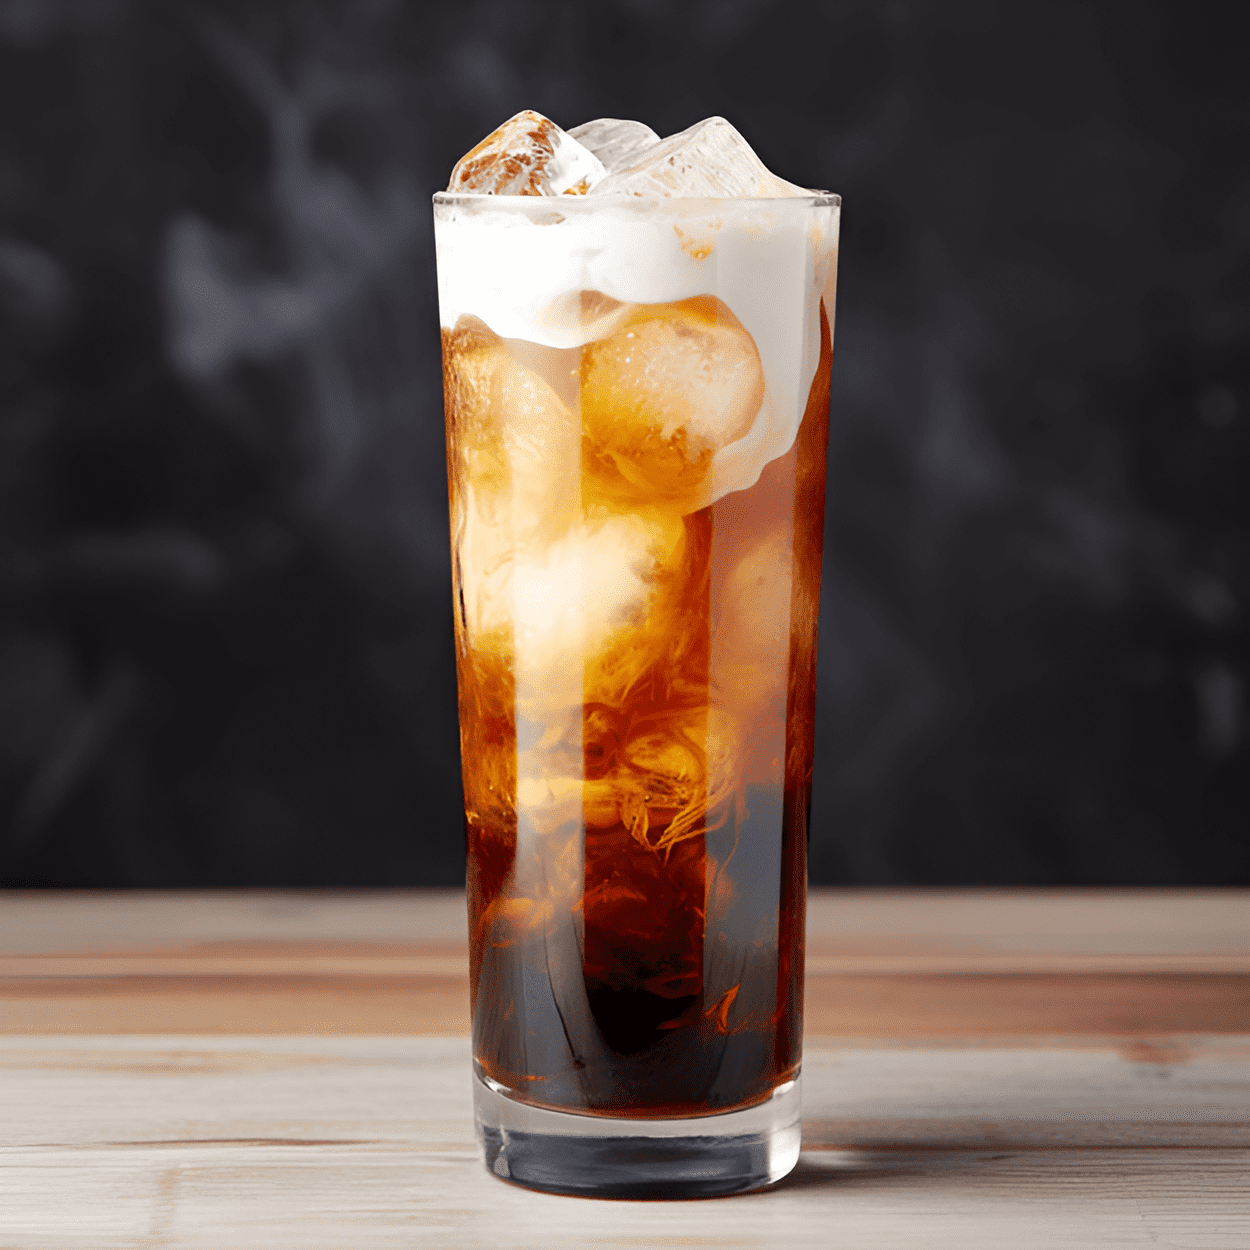 Paralyzer Cocktail Recipe - The Paralyzer is a creamy, sweet cocktail with a hint of coffee and cola flavor. It's smooth and rich, with a slight kick from the vodka.